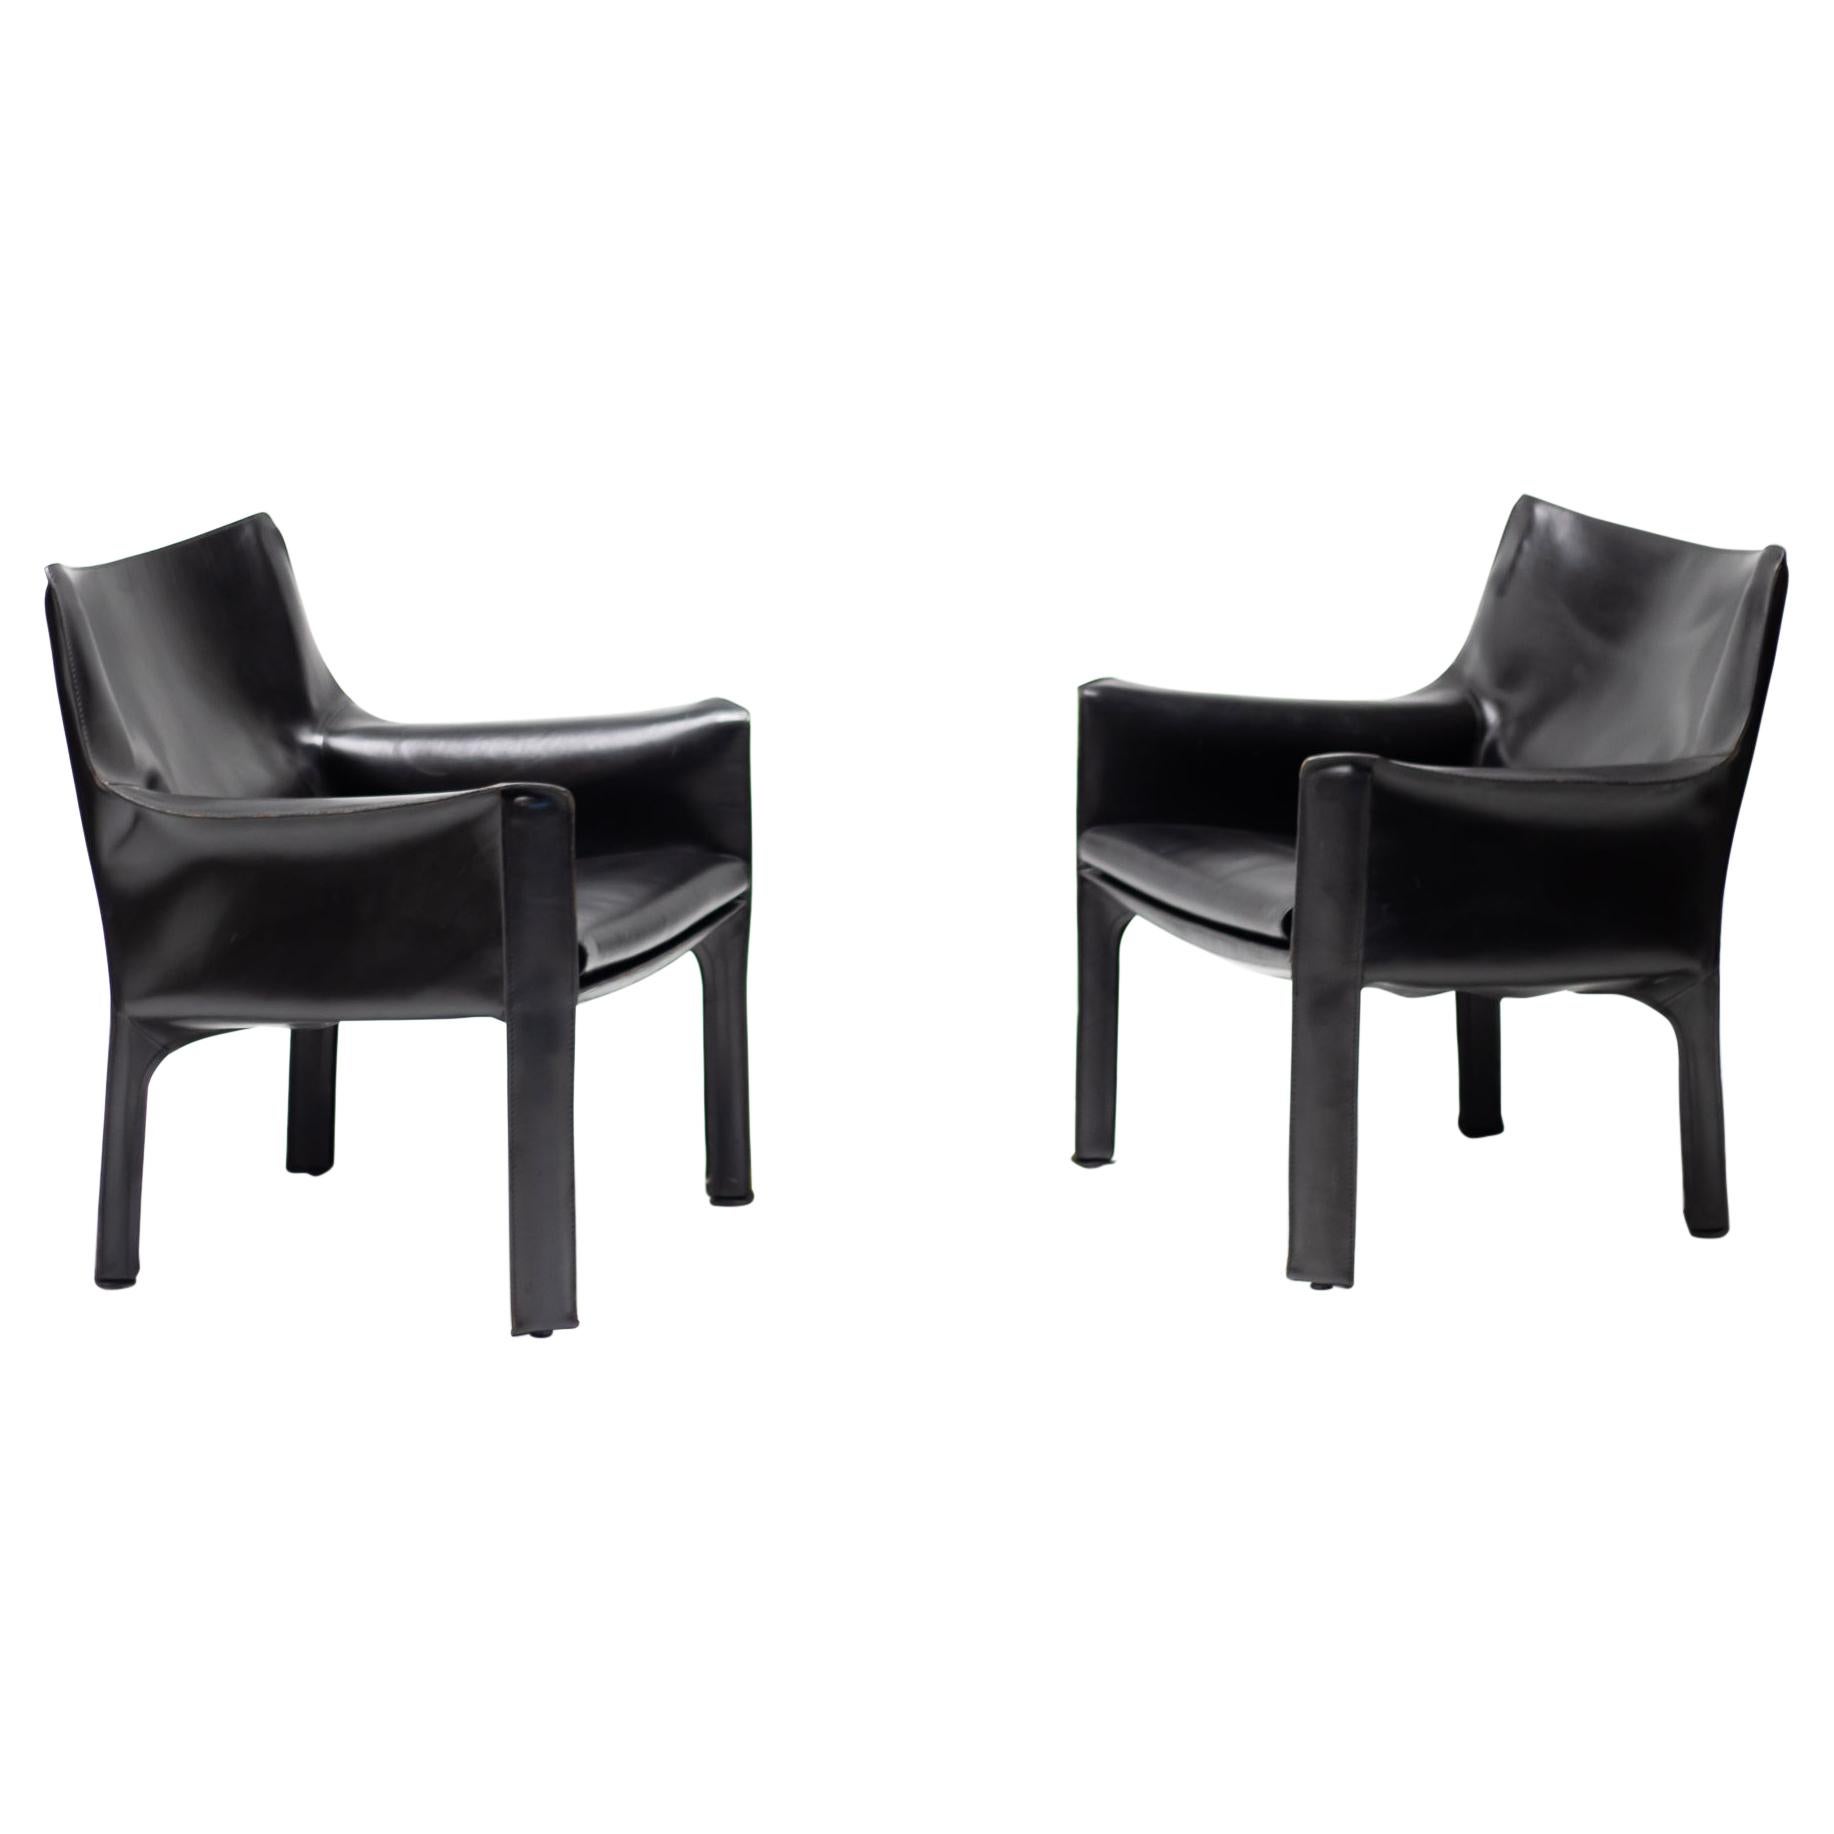 Pair of Cassina Cab 414 Lounge Chairs by Mario Bellini